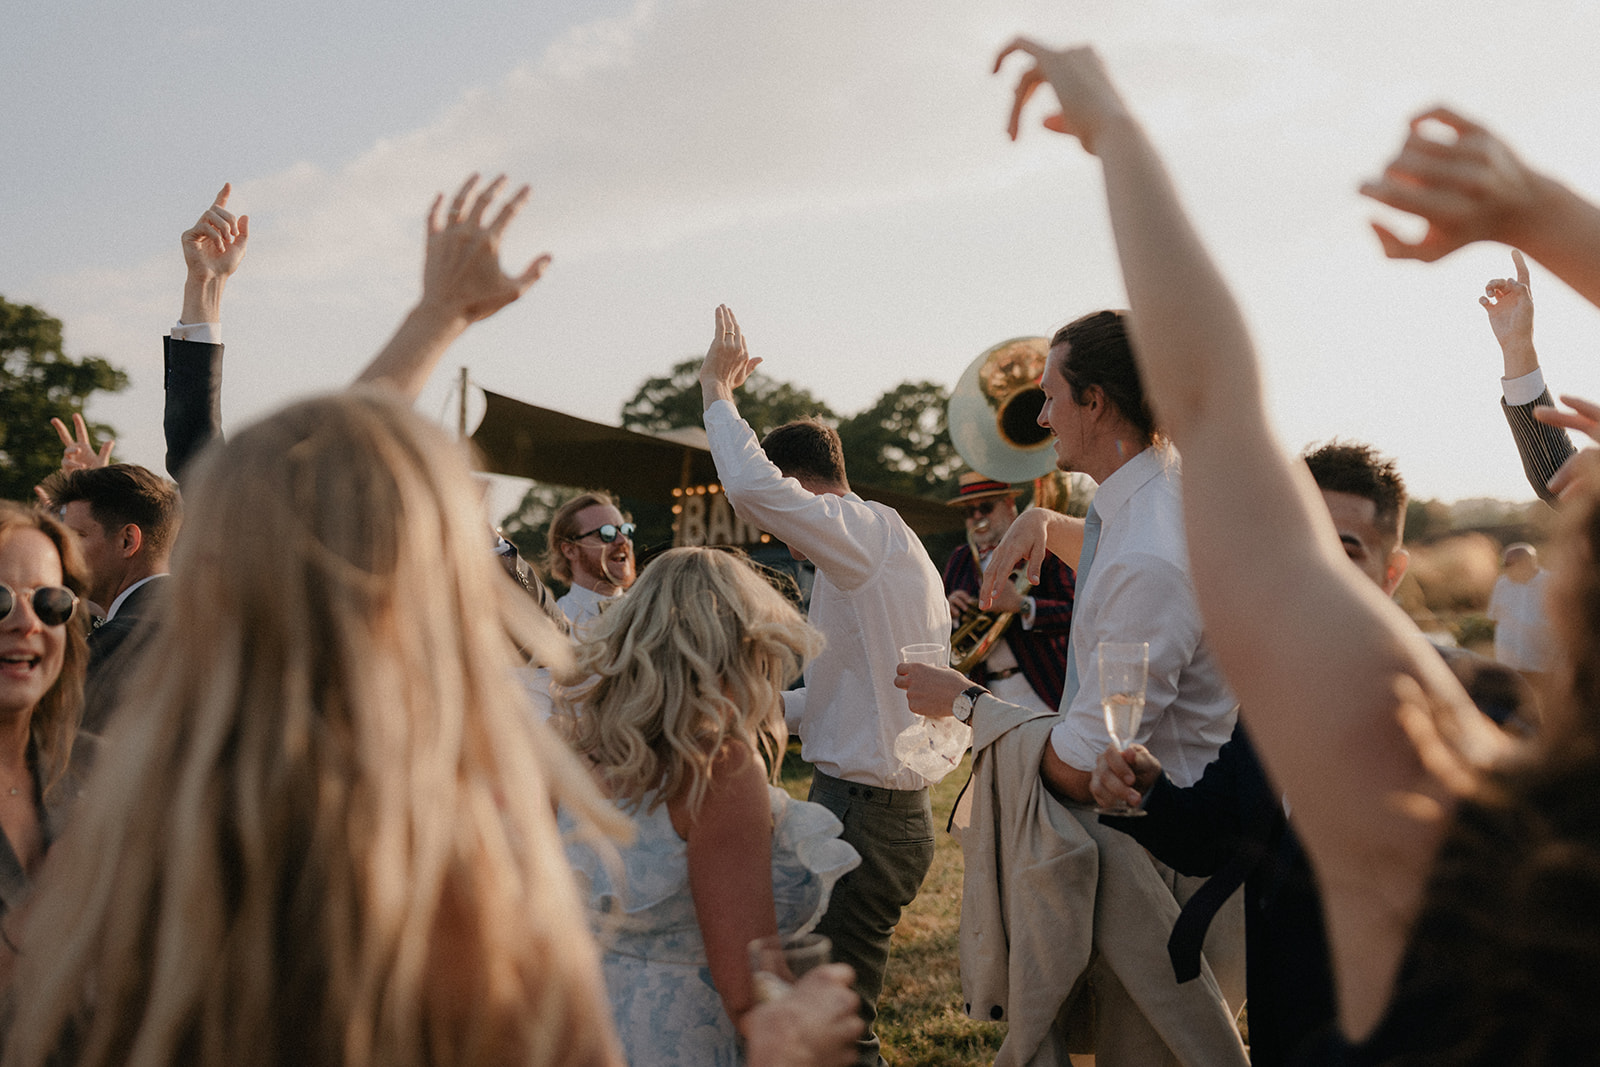 guests dancing outside during sunset at a wedding